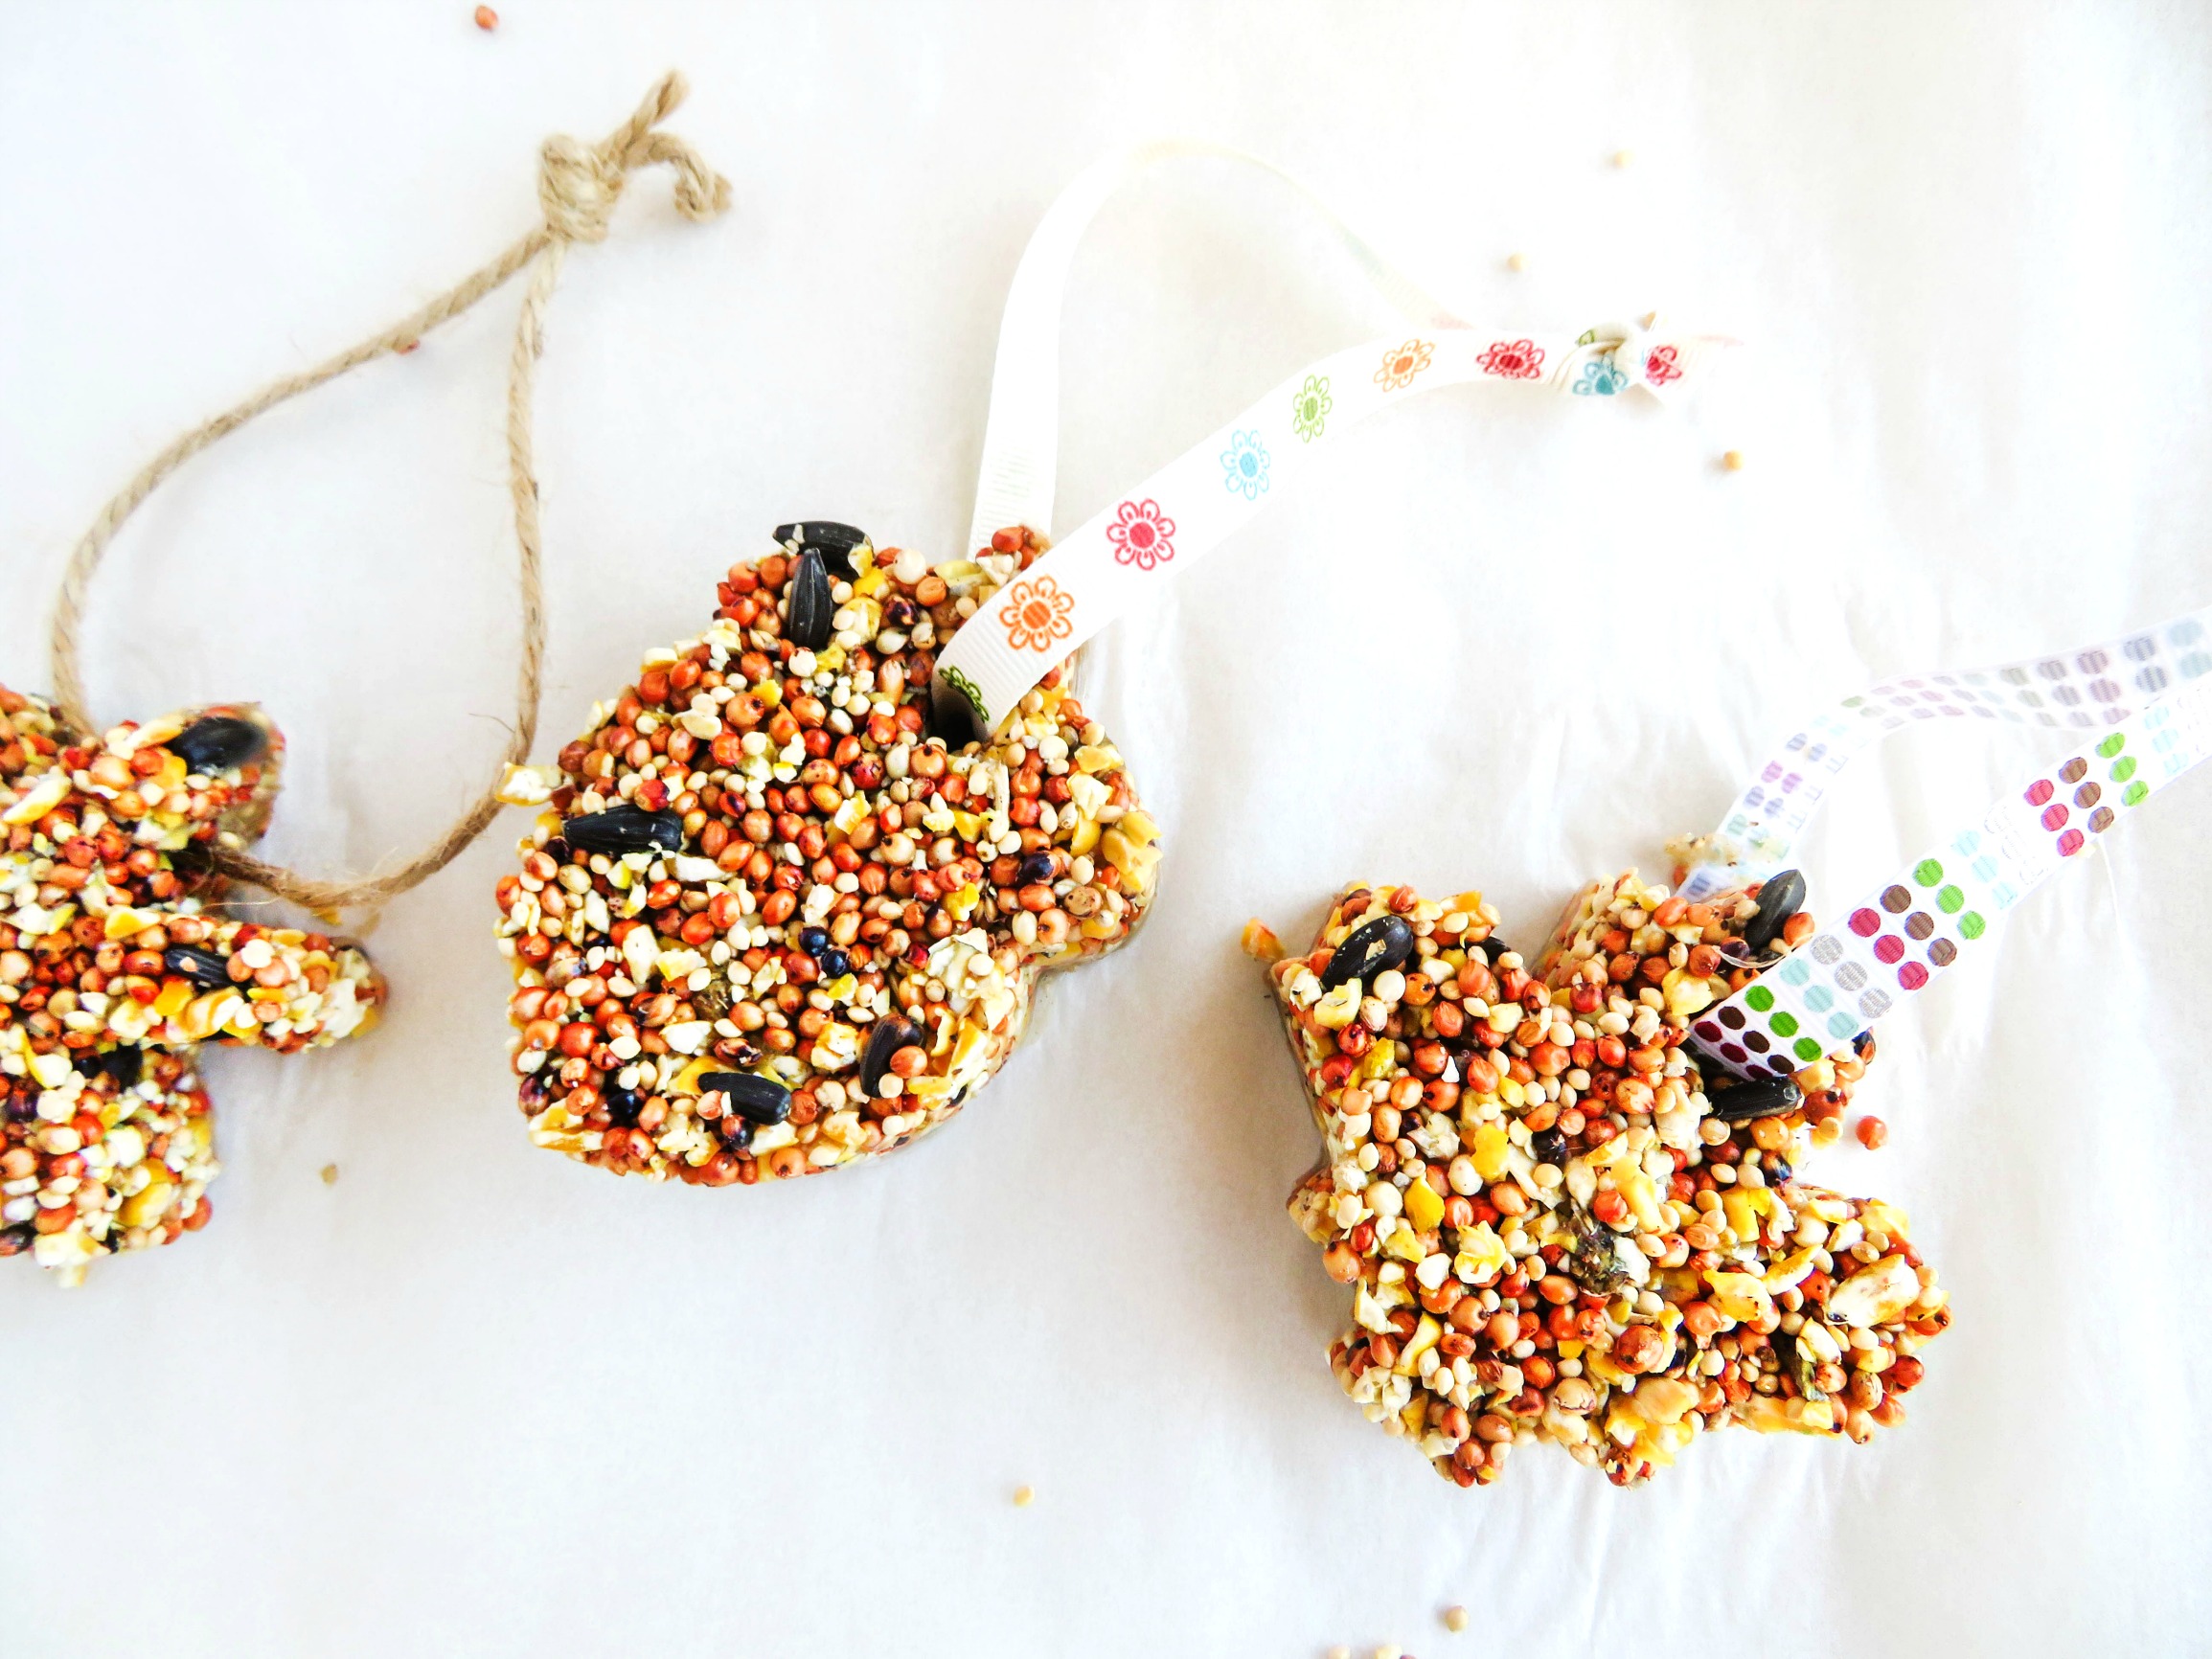 How to Make The Best Birdseed Ornaments, Homemade Birdseed treats make the perfect family activity, DIY Bird feeders are a great craft for kids, Birdseed Ornaments Recipe #birdseedornaments #Birdtreats #homemadebirdfeeders #birds 